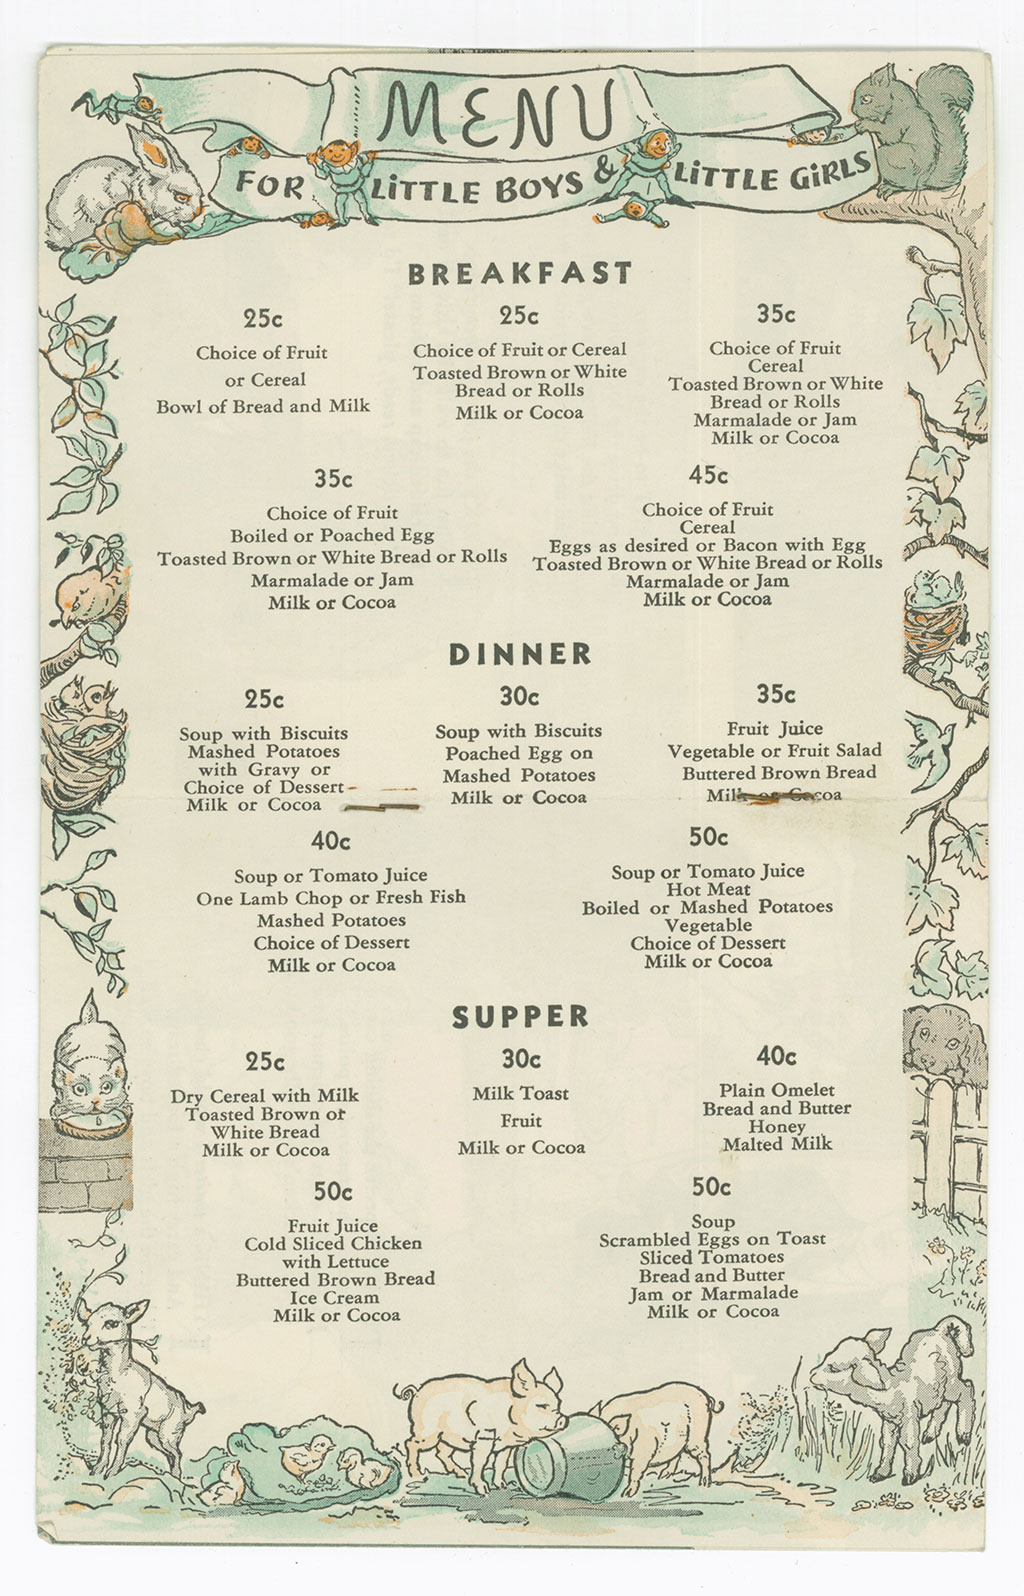 Old-fashioned menu showing possibilities for breakfast, dinner and supper for little boys and girls.